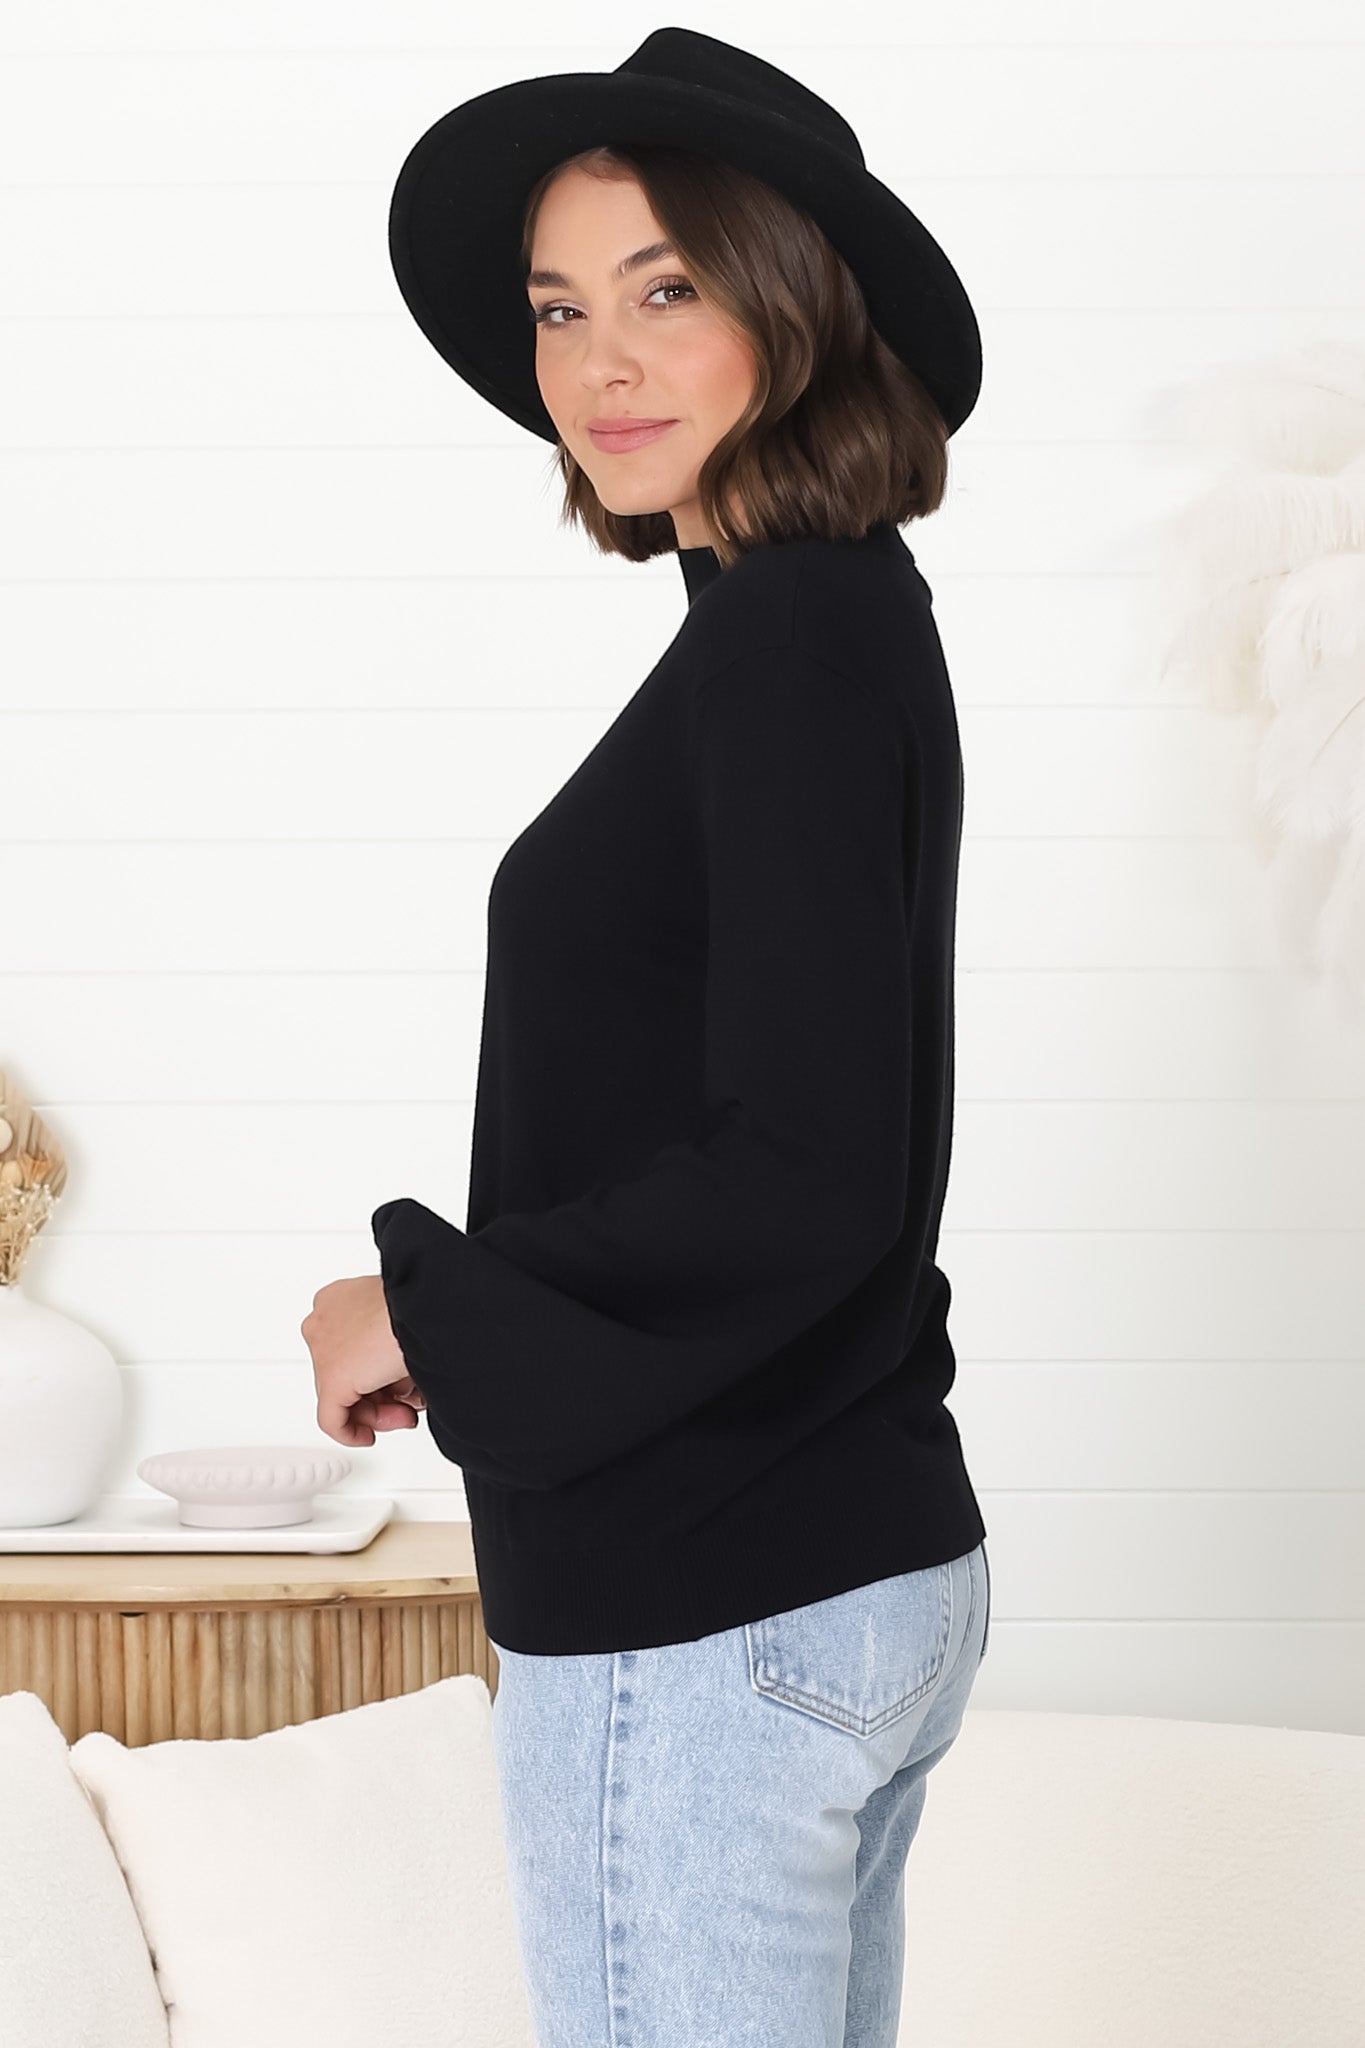 Tallum Knit Top - High Neck Knit Top with Balloon Sleeves in Black